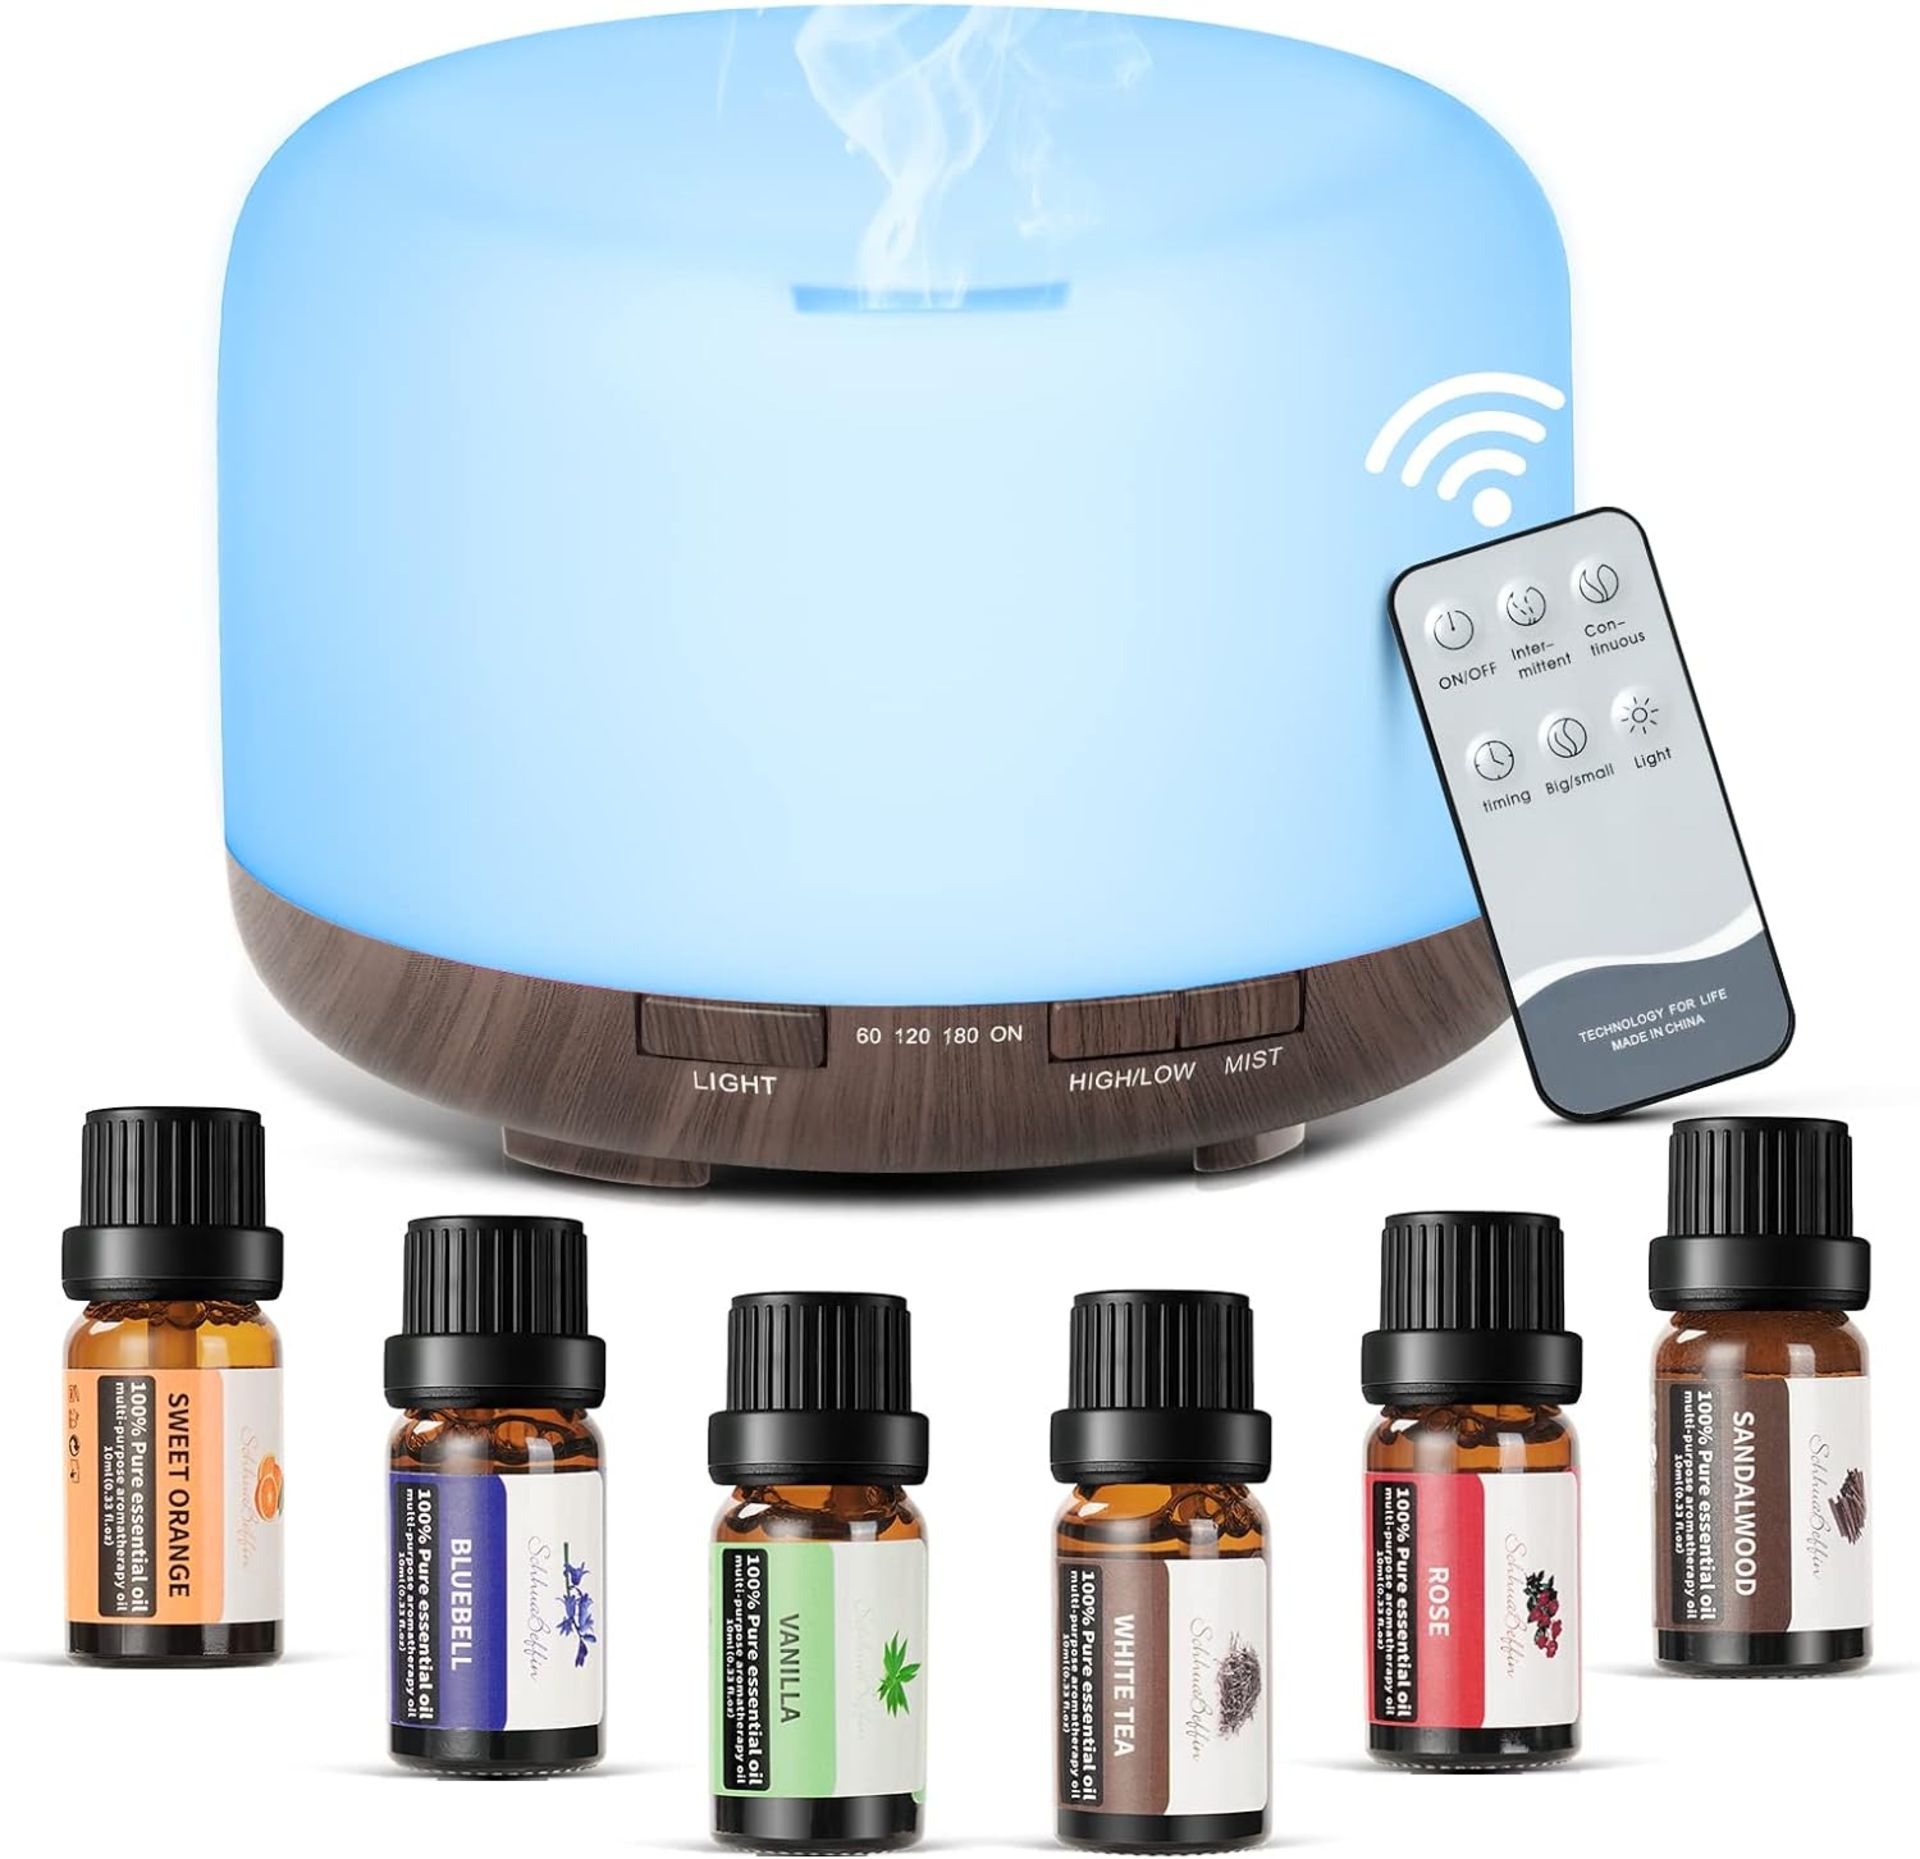 ACWOO Aromatherapy Diffuser Set, 500ml Aromatherapy Scented Diffuser Humidifier with Remote Control,